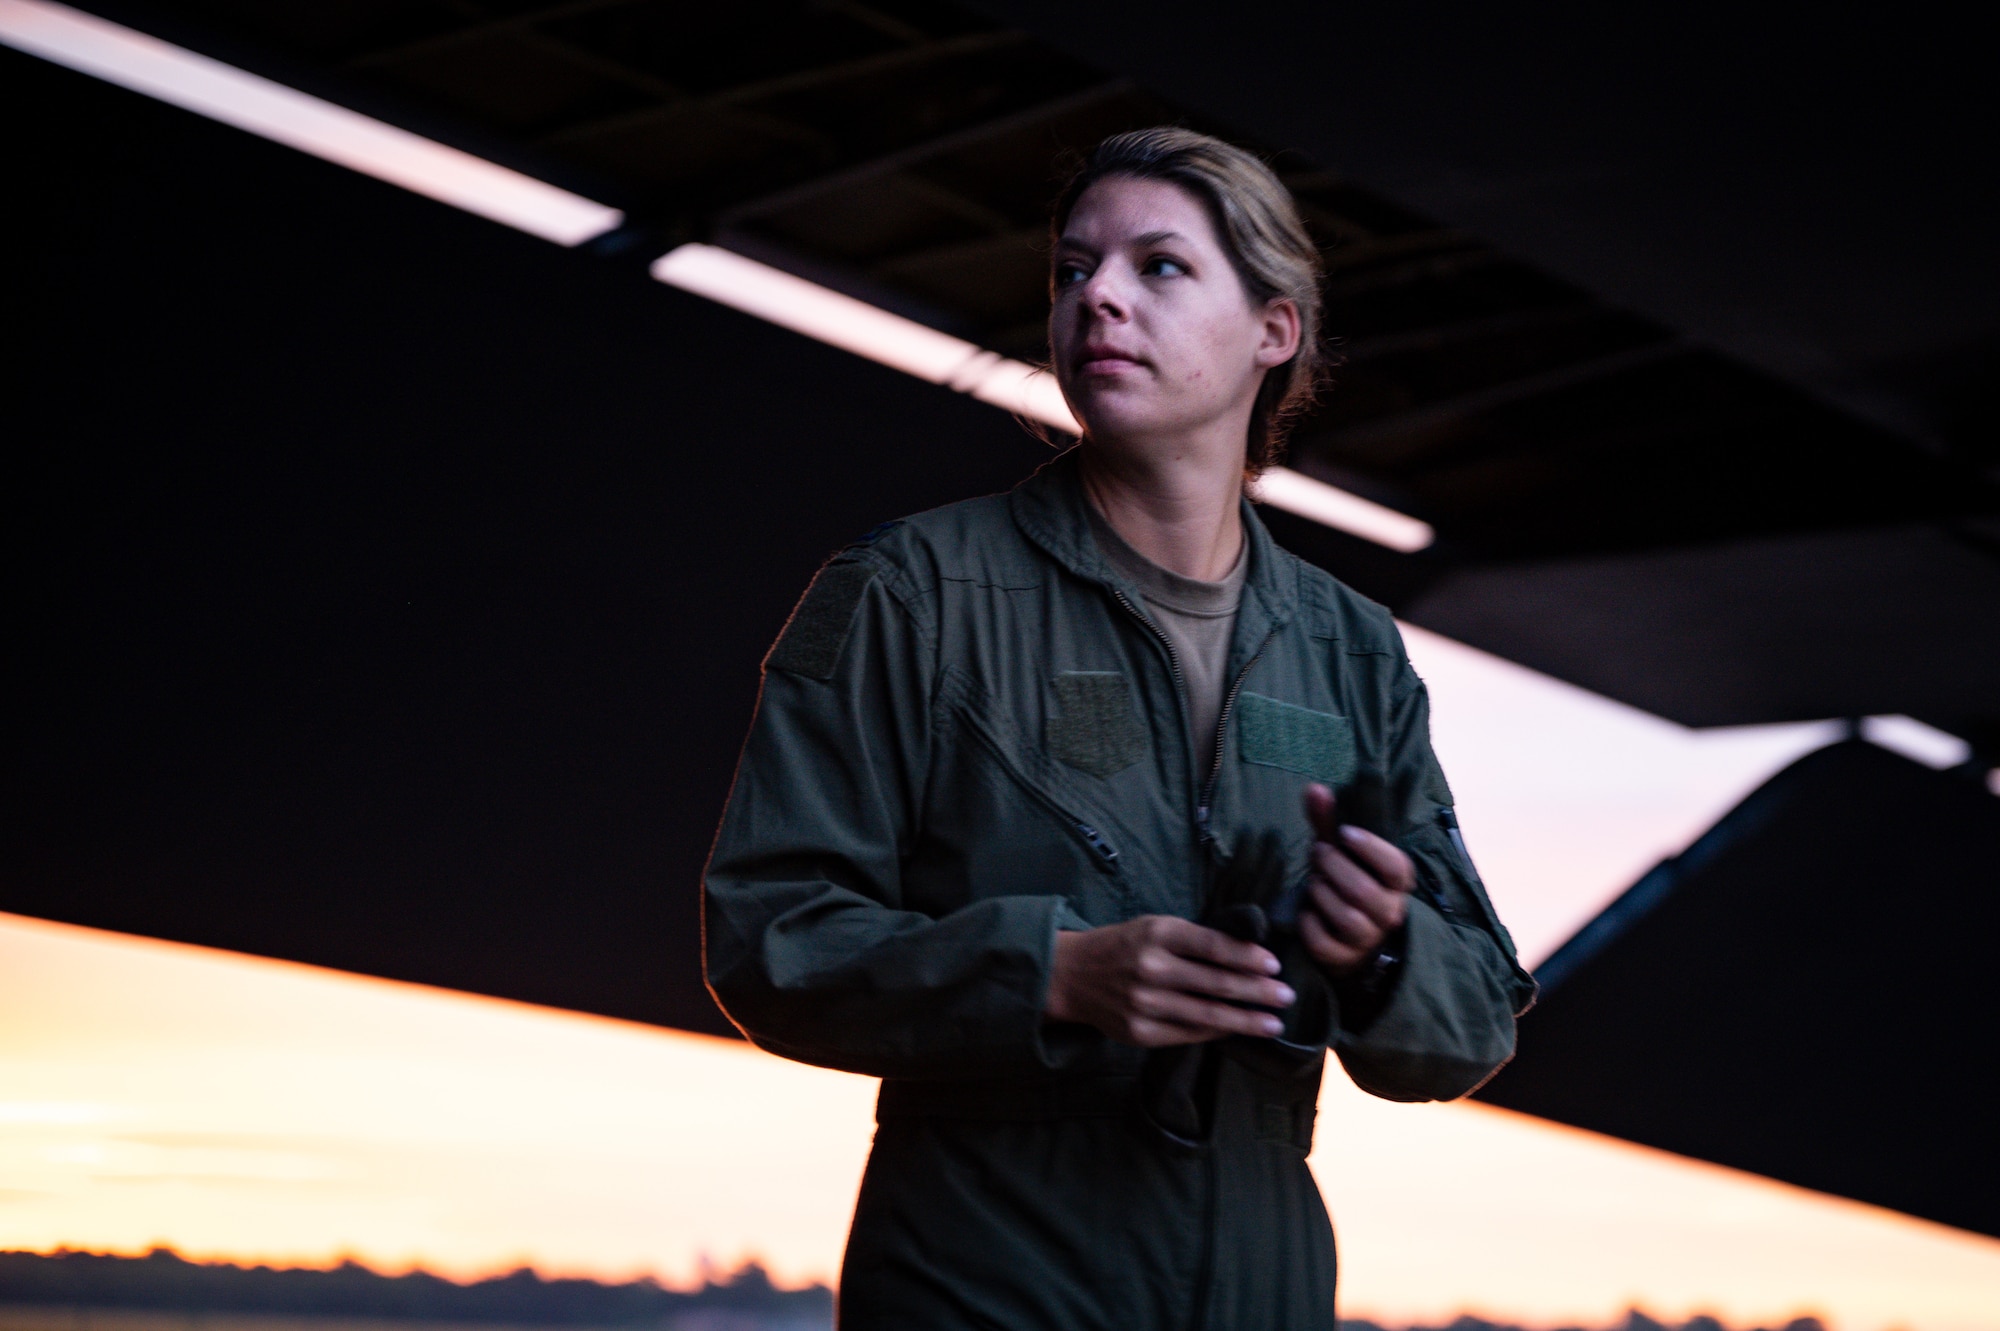 Capt. Sarah Rowley, 96th Bomb Squadron weapon systems officer, performs pre-flight checks during exercise Global Storm at Barksdale Air Force Base, Louisiana, Aug. 18, 2021.